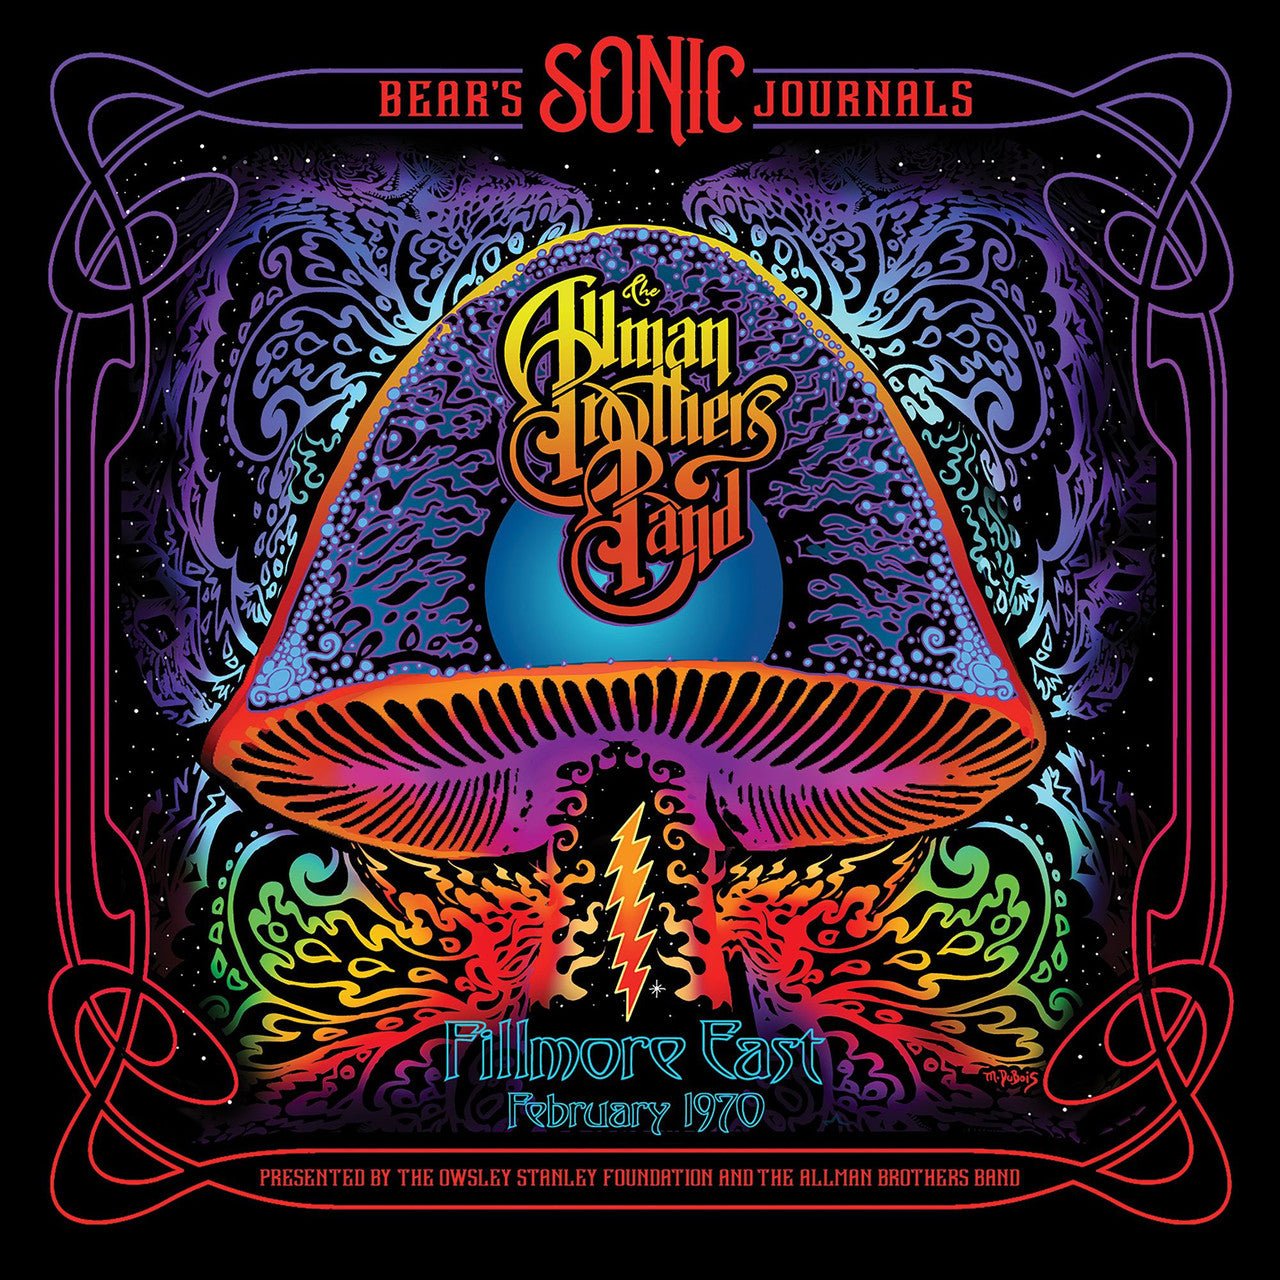 Allman Brothers Band Bear’s Sonic Journals: Fillmore East February 1970 (2-LP)